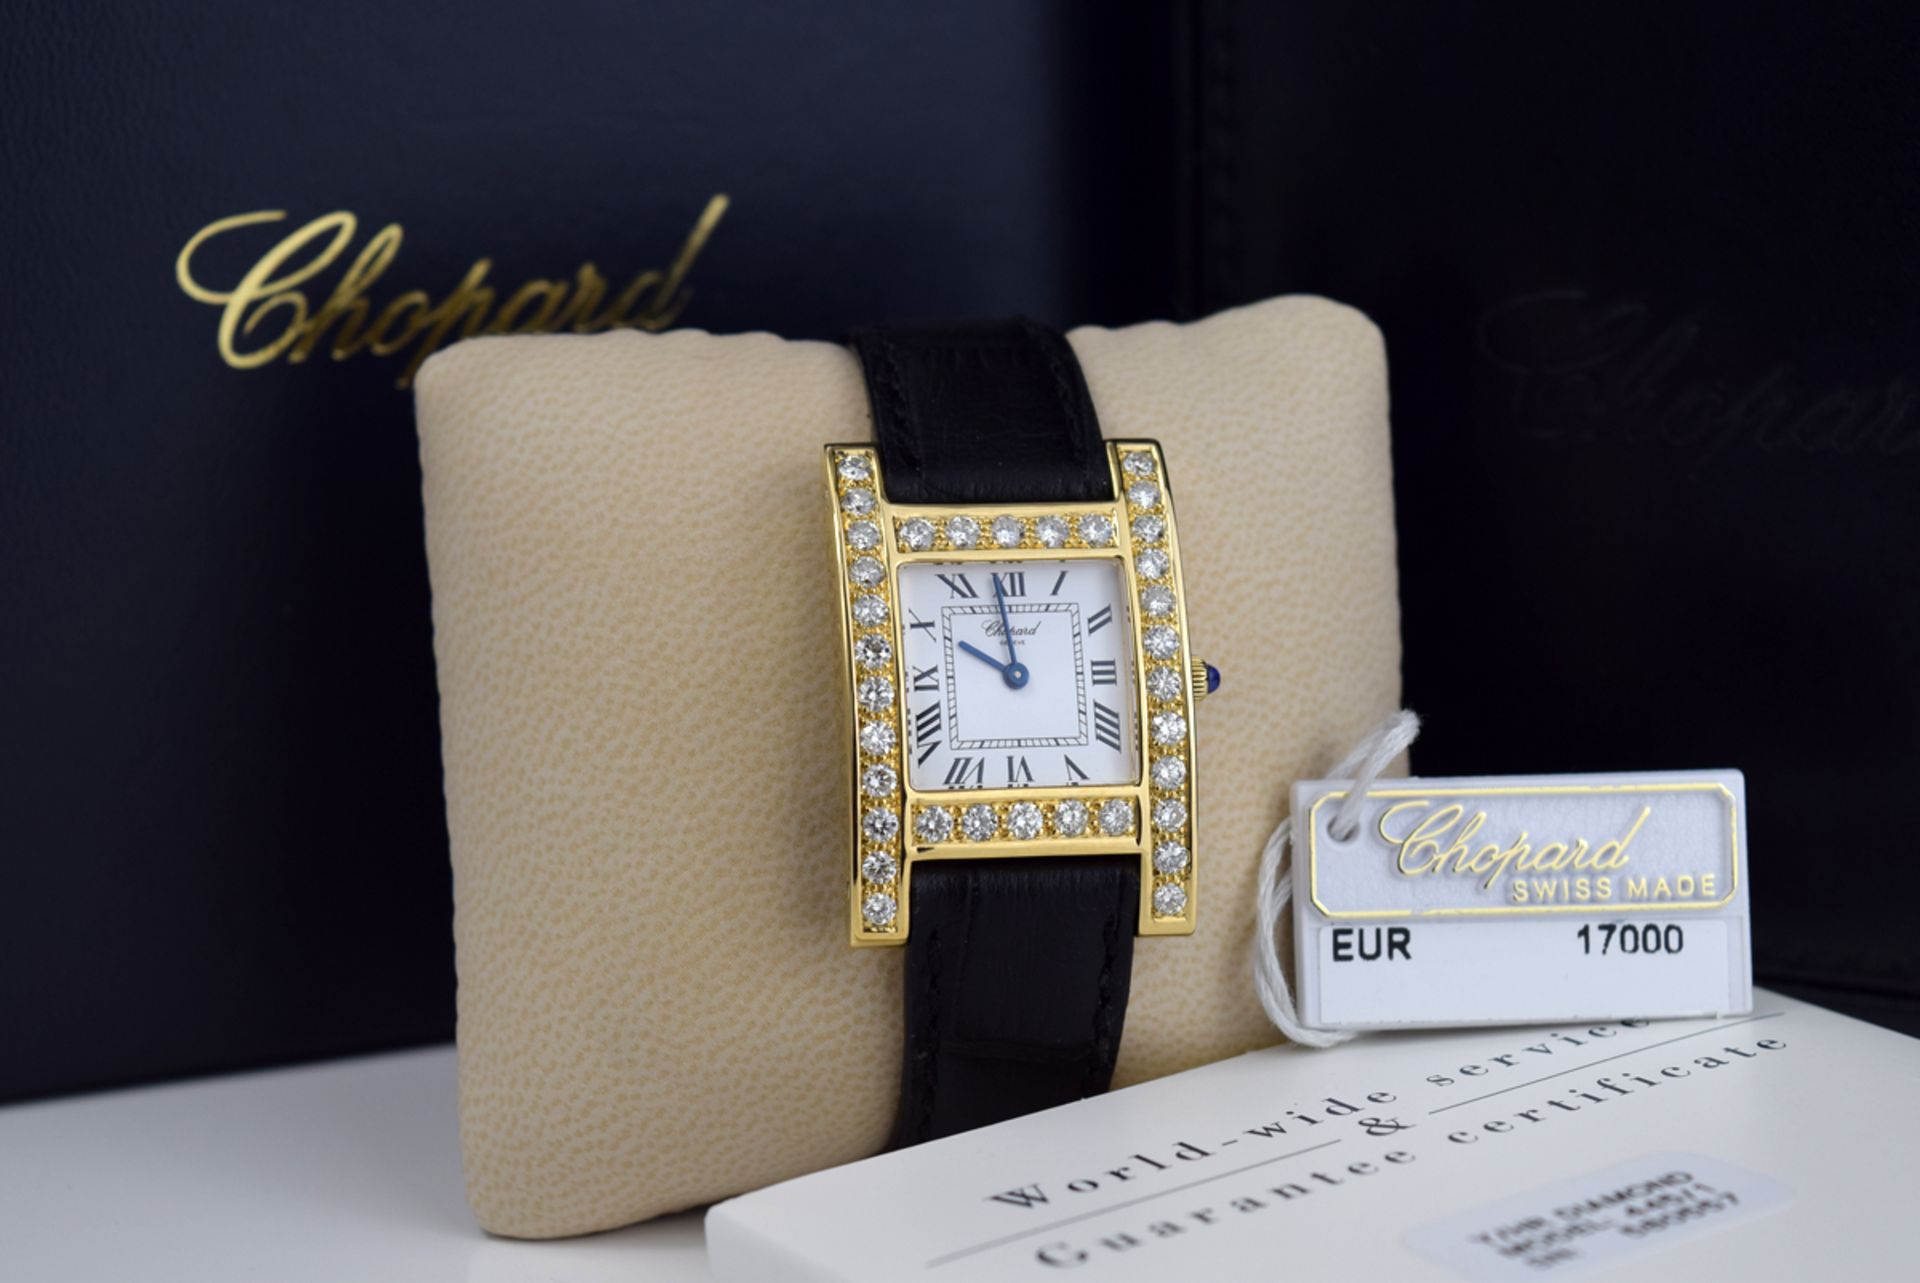 ❤ CHOPARD - DIAMOND 'H' / YOUR HOUR - 18K GOLD with DIAMOND SET CASE - Image 7 of 10